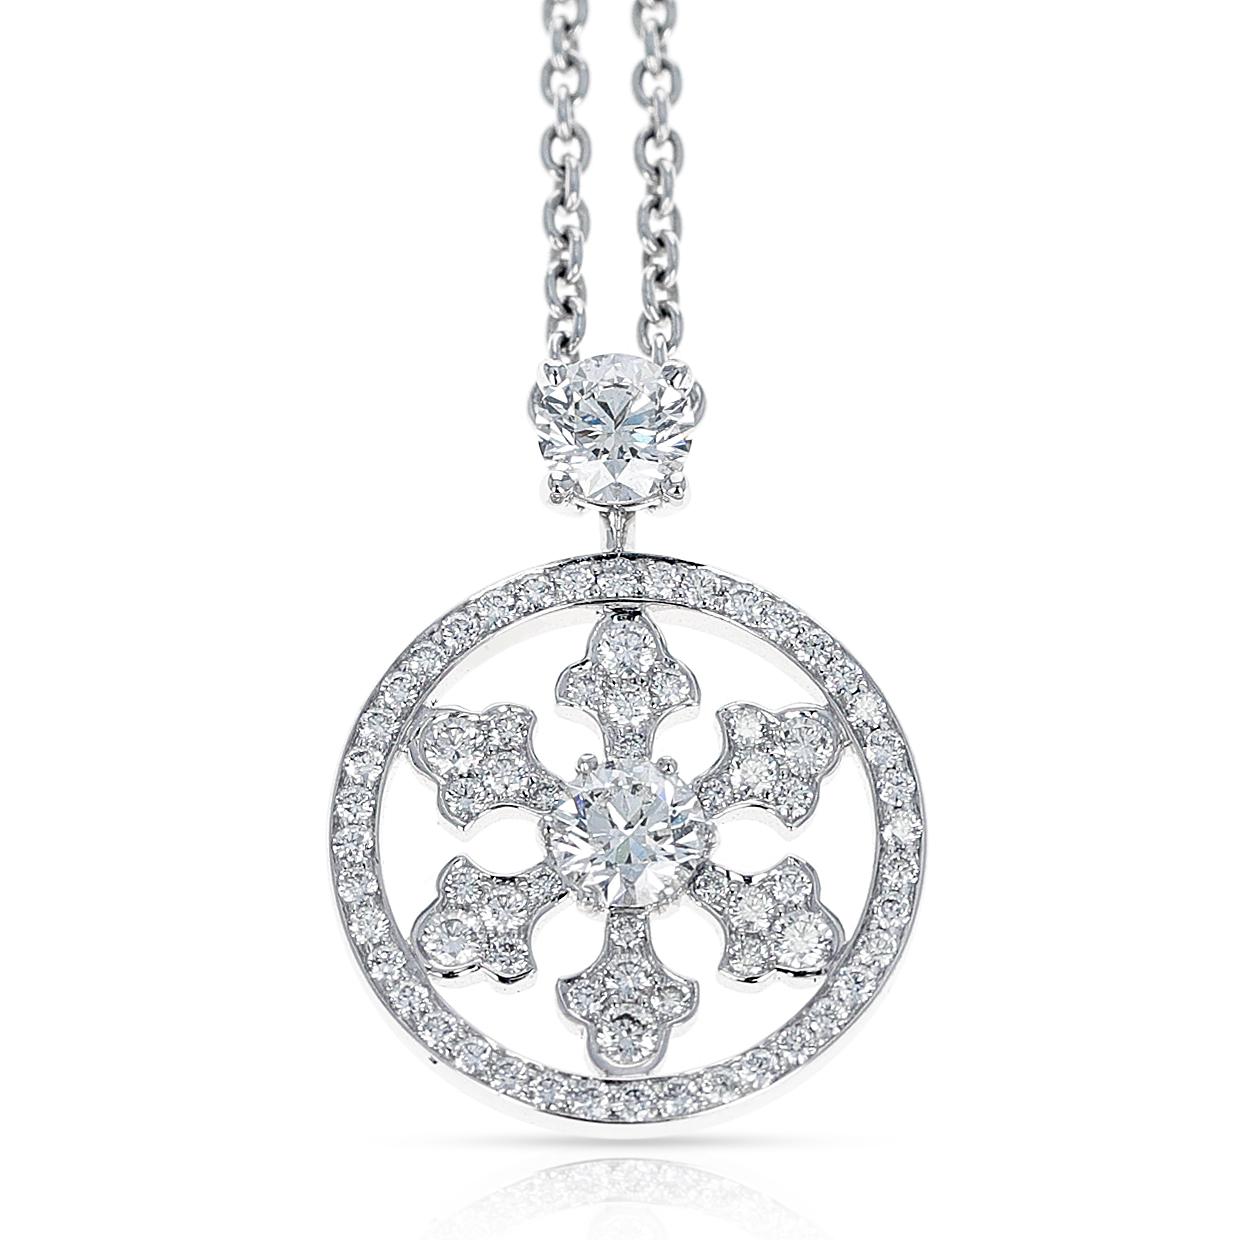 A Graff 0.89 ct. Diamond Snowflake Pendant Necklace, 18K White Gold. The length of the pendant is 3/4.